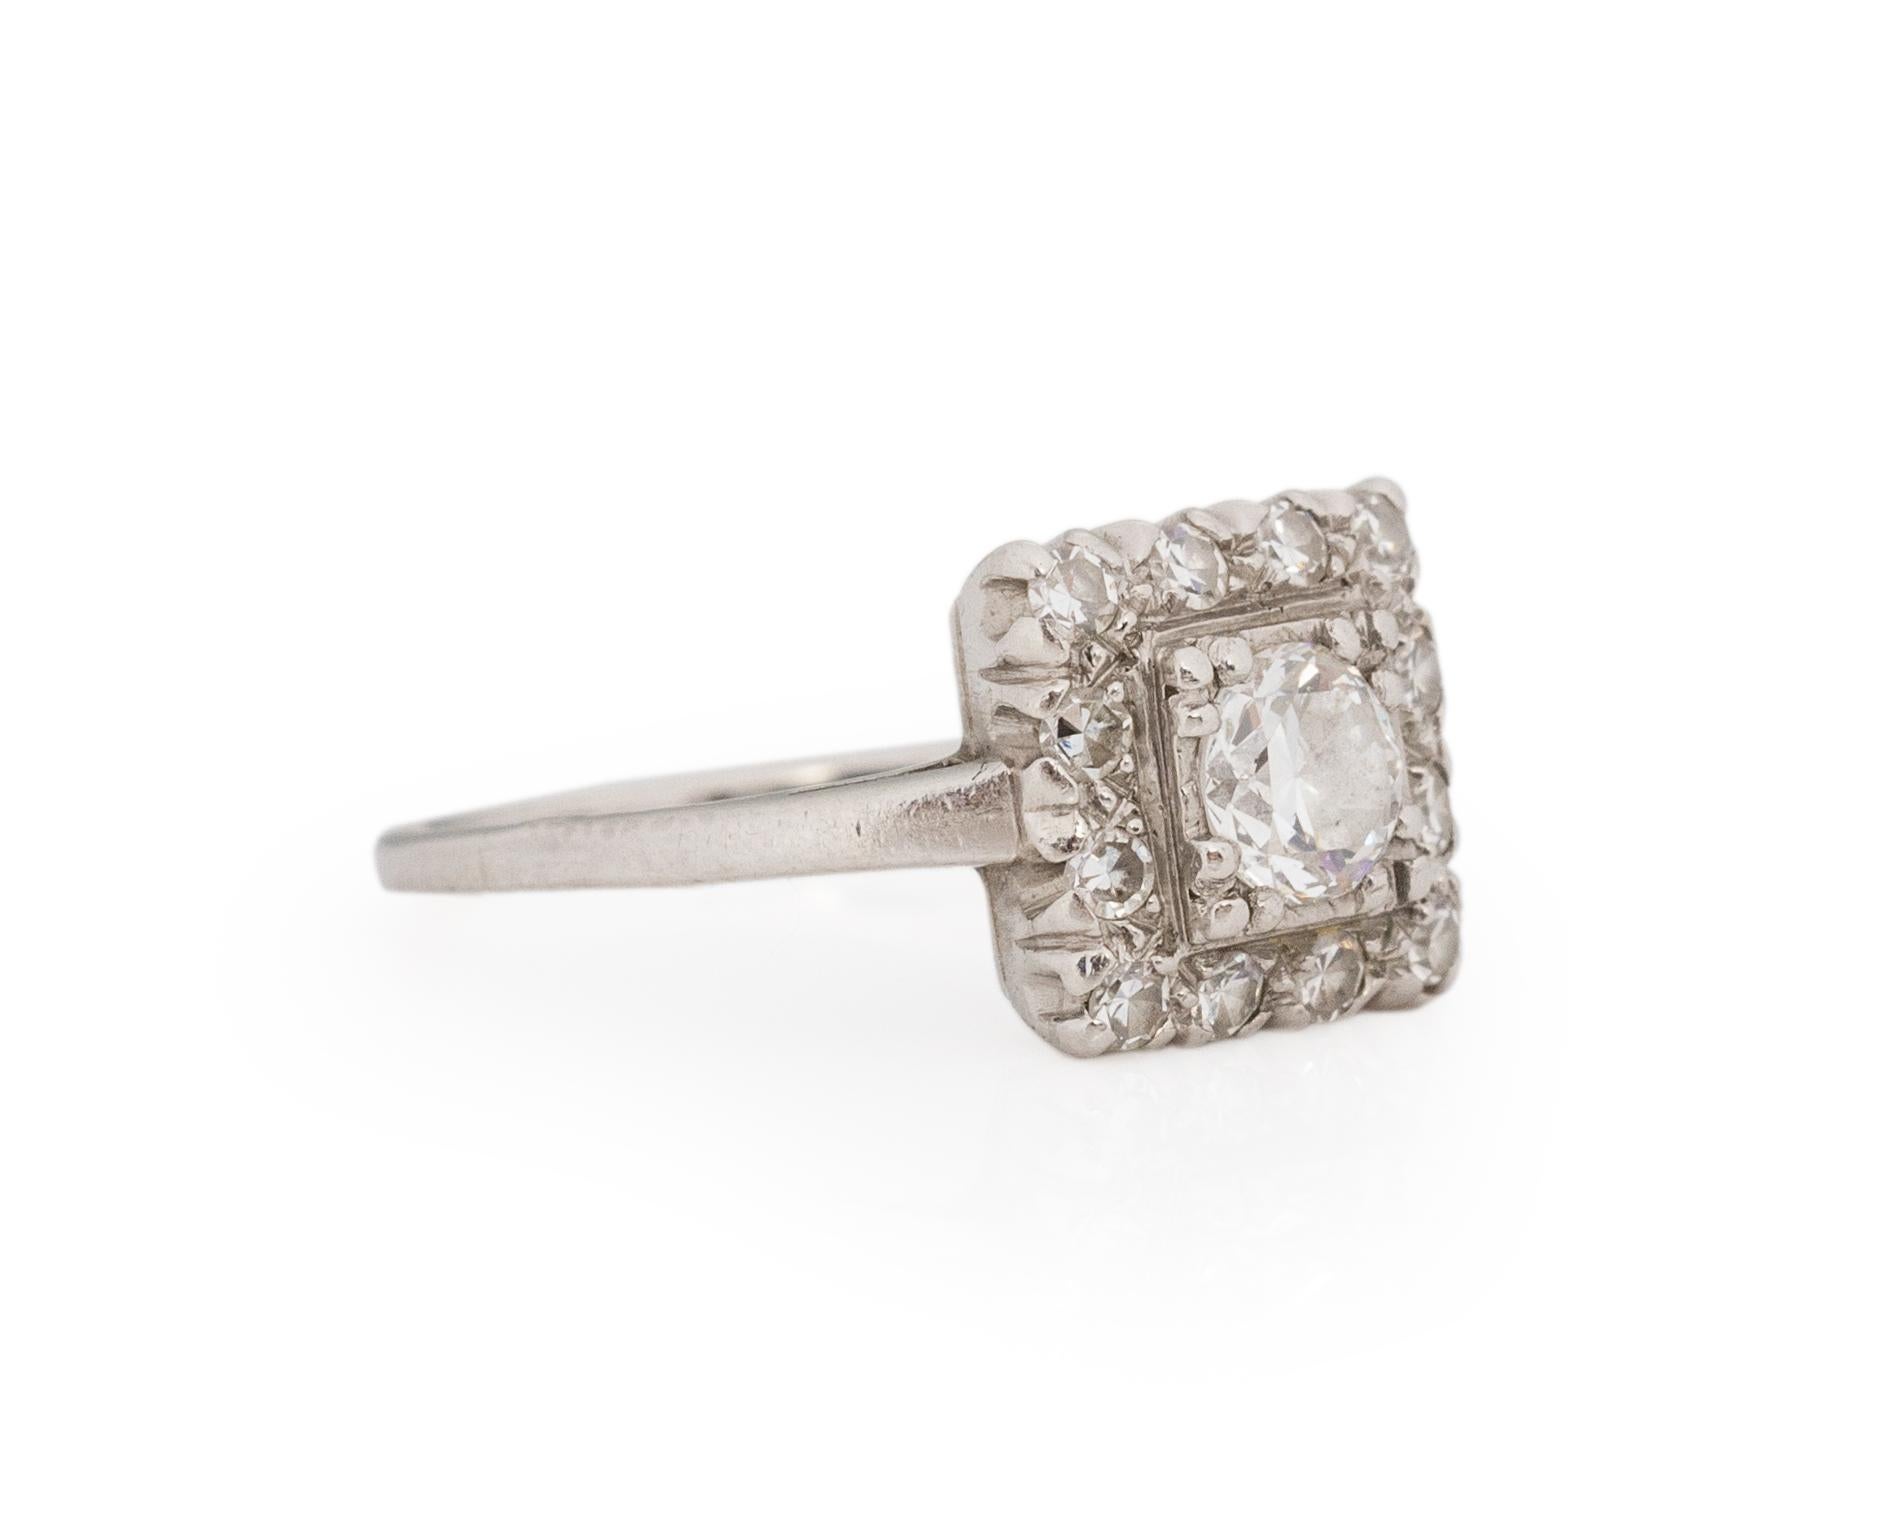 Ring Size: 3.5
Metal Type: Platinum [Hallmarked, and Tested]
Weight: 2.0 grams

Center Diamond Details: 
Weight: .30carat
Cut: Old European brilliant
Color: G
Clarity: VS

Side Stone Details:
Weight: .20carat, total
Cut: Antique European Cut
Color: